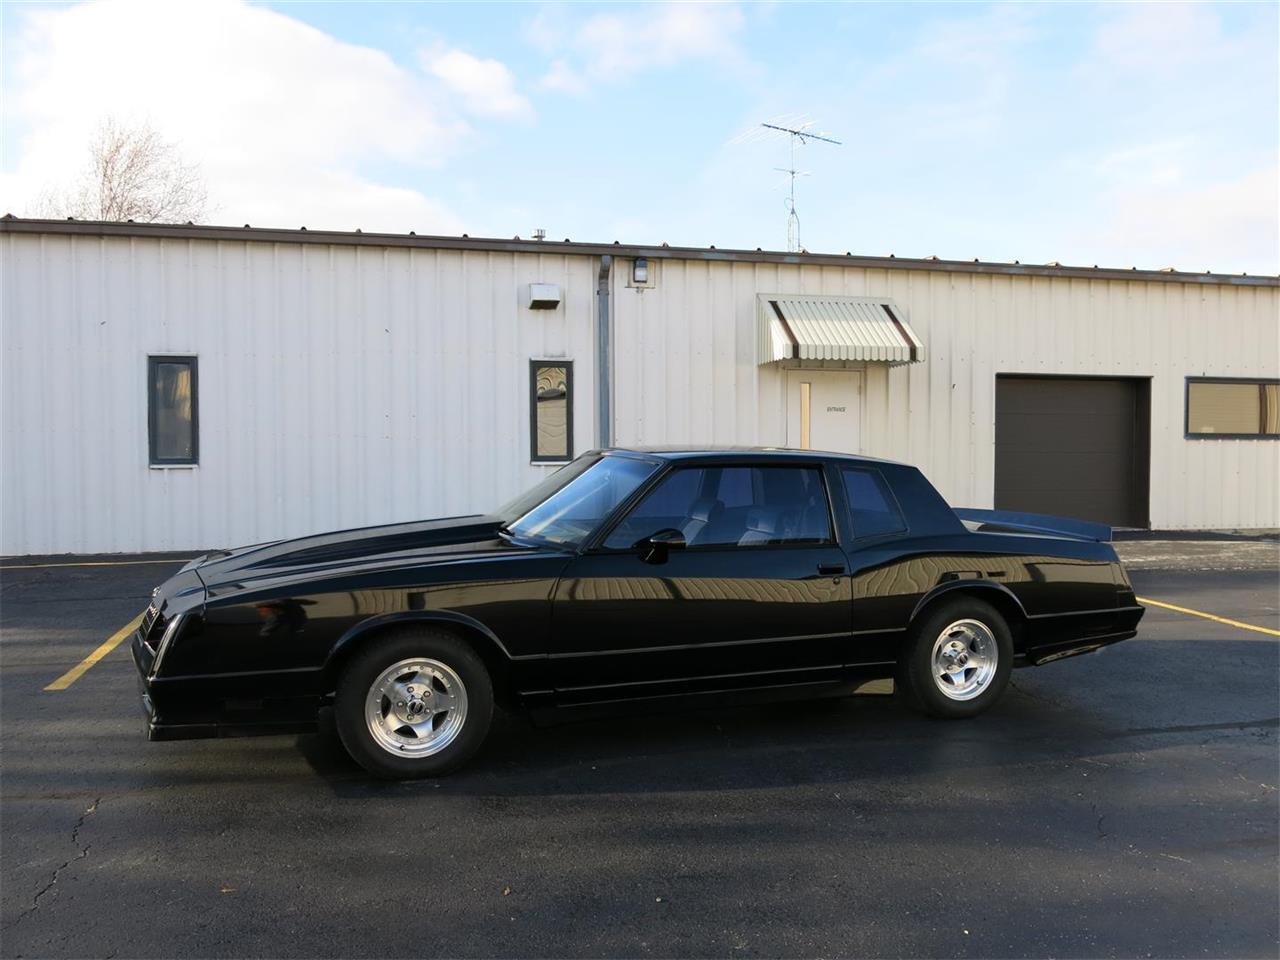 1985 chevrolet monte carlo ss for sale classiccars com cc 1167333 1985 chevrolet monte carlo ss for sale